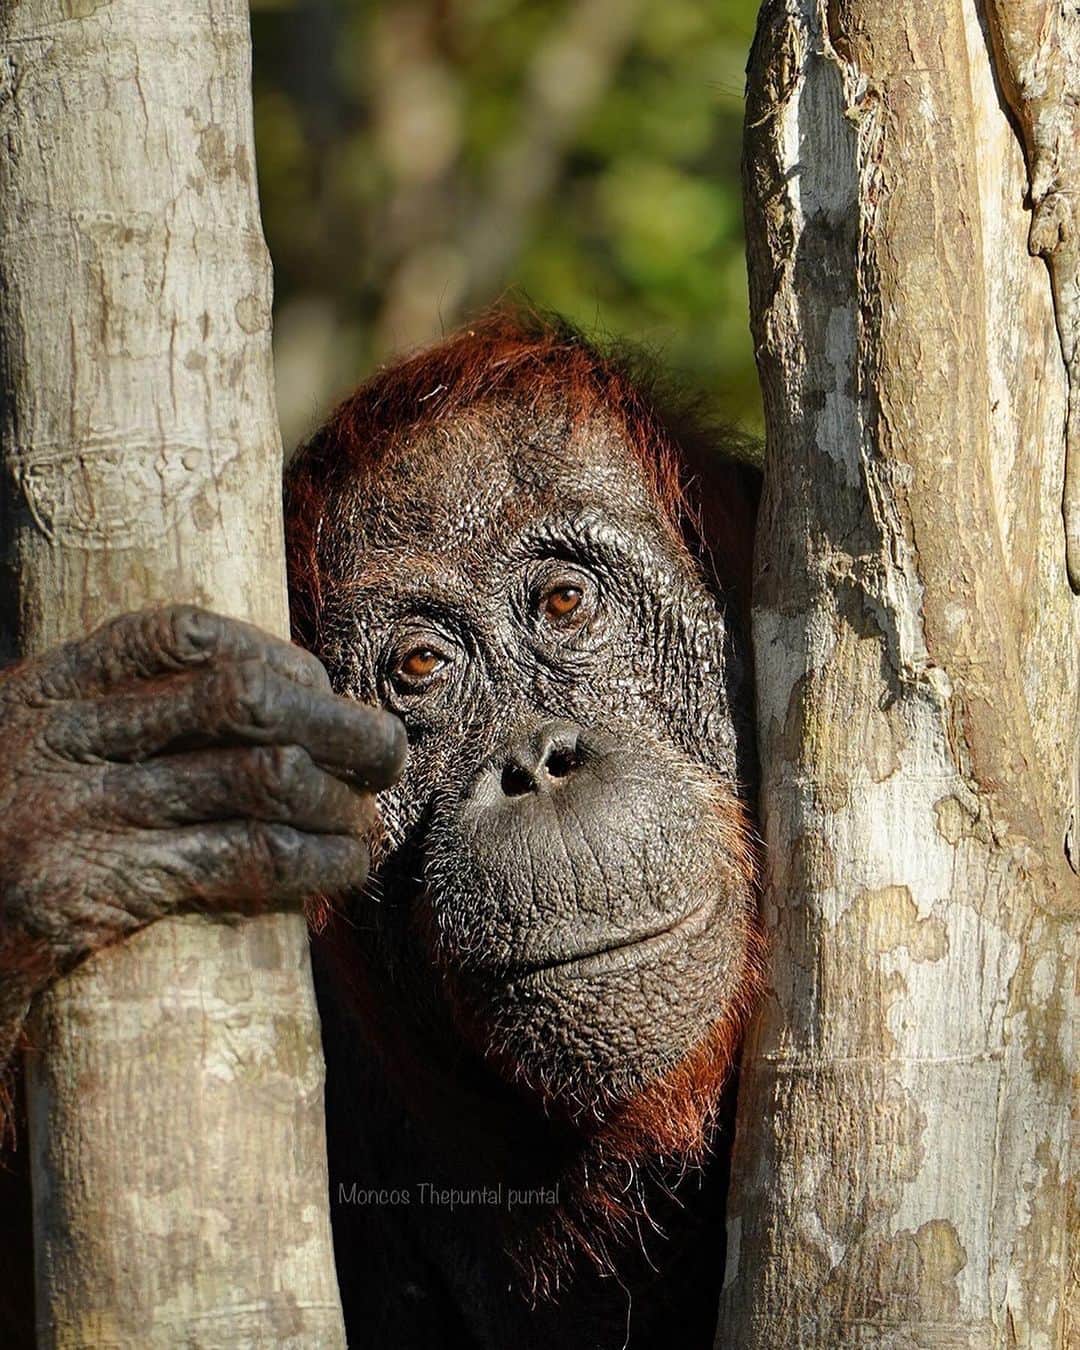 OFI Australiaのインスタグラム：「Look at this gorgeous, kind, wise face. 🥰 Sandra is a rehabilitated ex-captive orangutan. She now lives wild and free in Tanjung Puting National Park, Central Kalimantan, Borneo.  Thank you for this lovely photo @moncos_thepuntal_puntal   #tanjungputingnationalpark #OrangutanRehabilitation #ofi #SaveOrangutans #borneo」